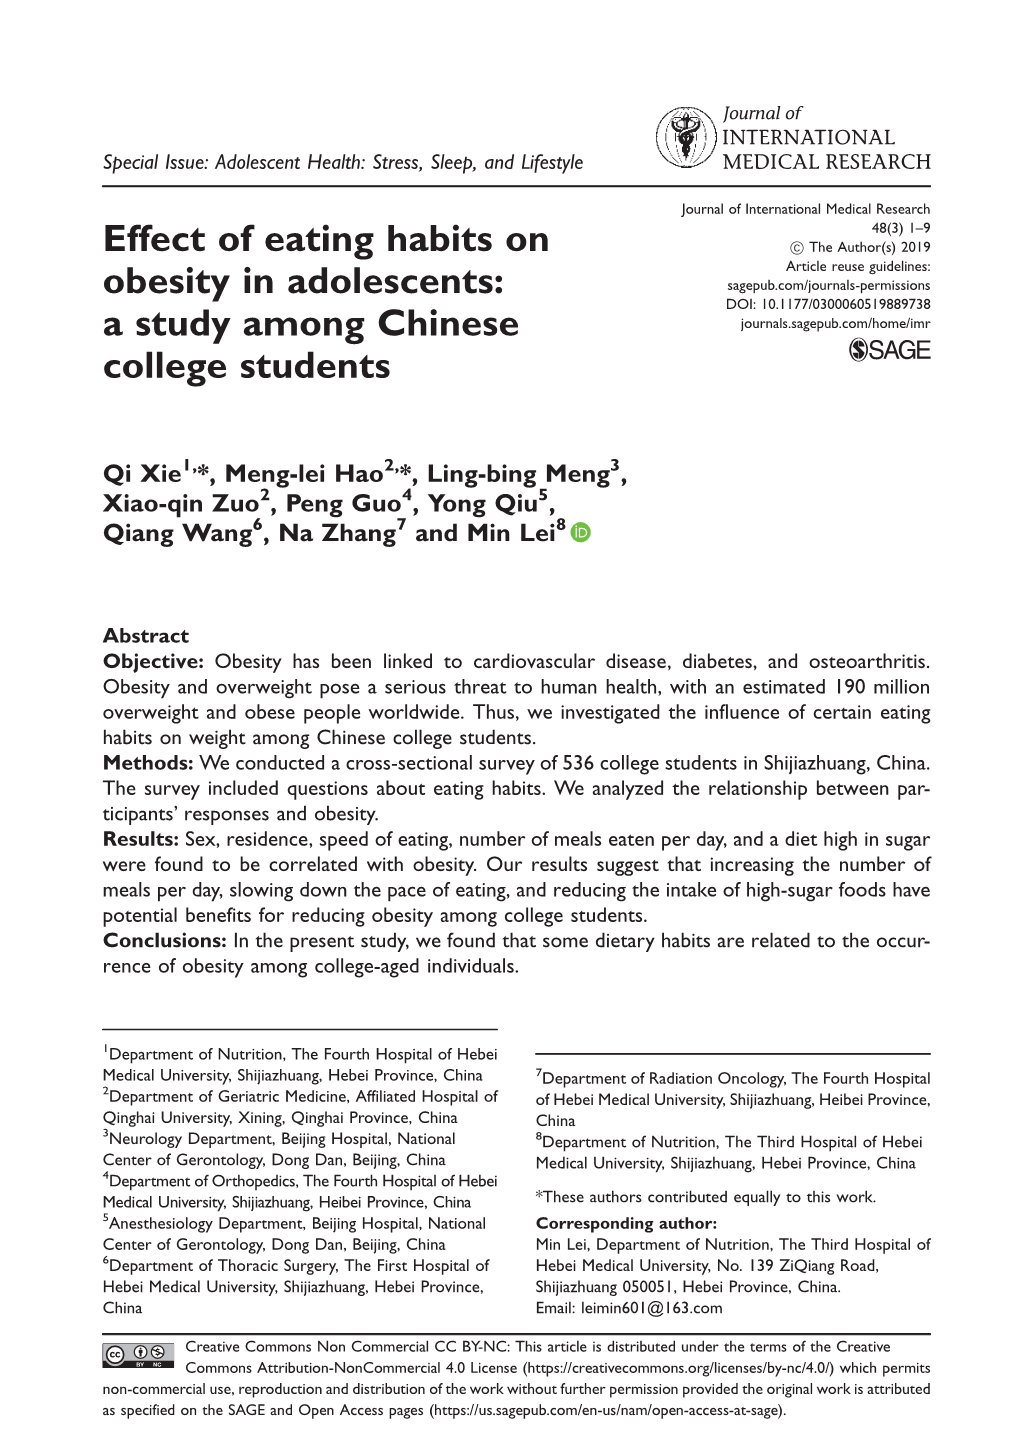 Effect of Eating Habits on Obesity in Adolescents